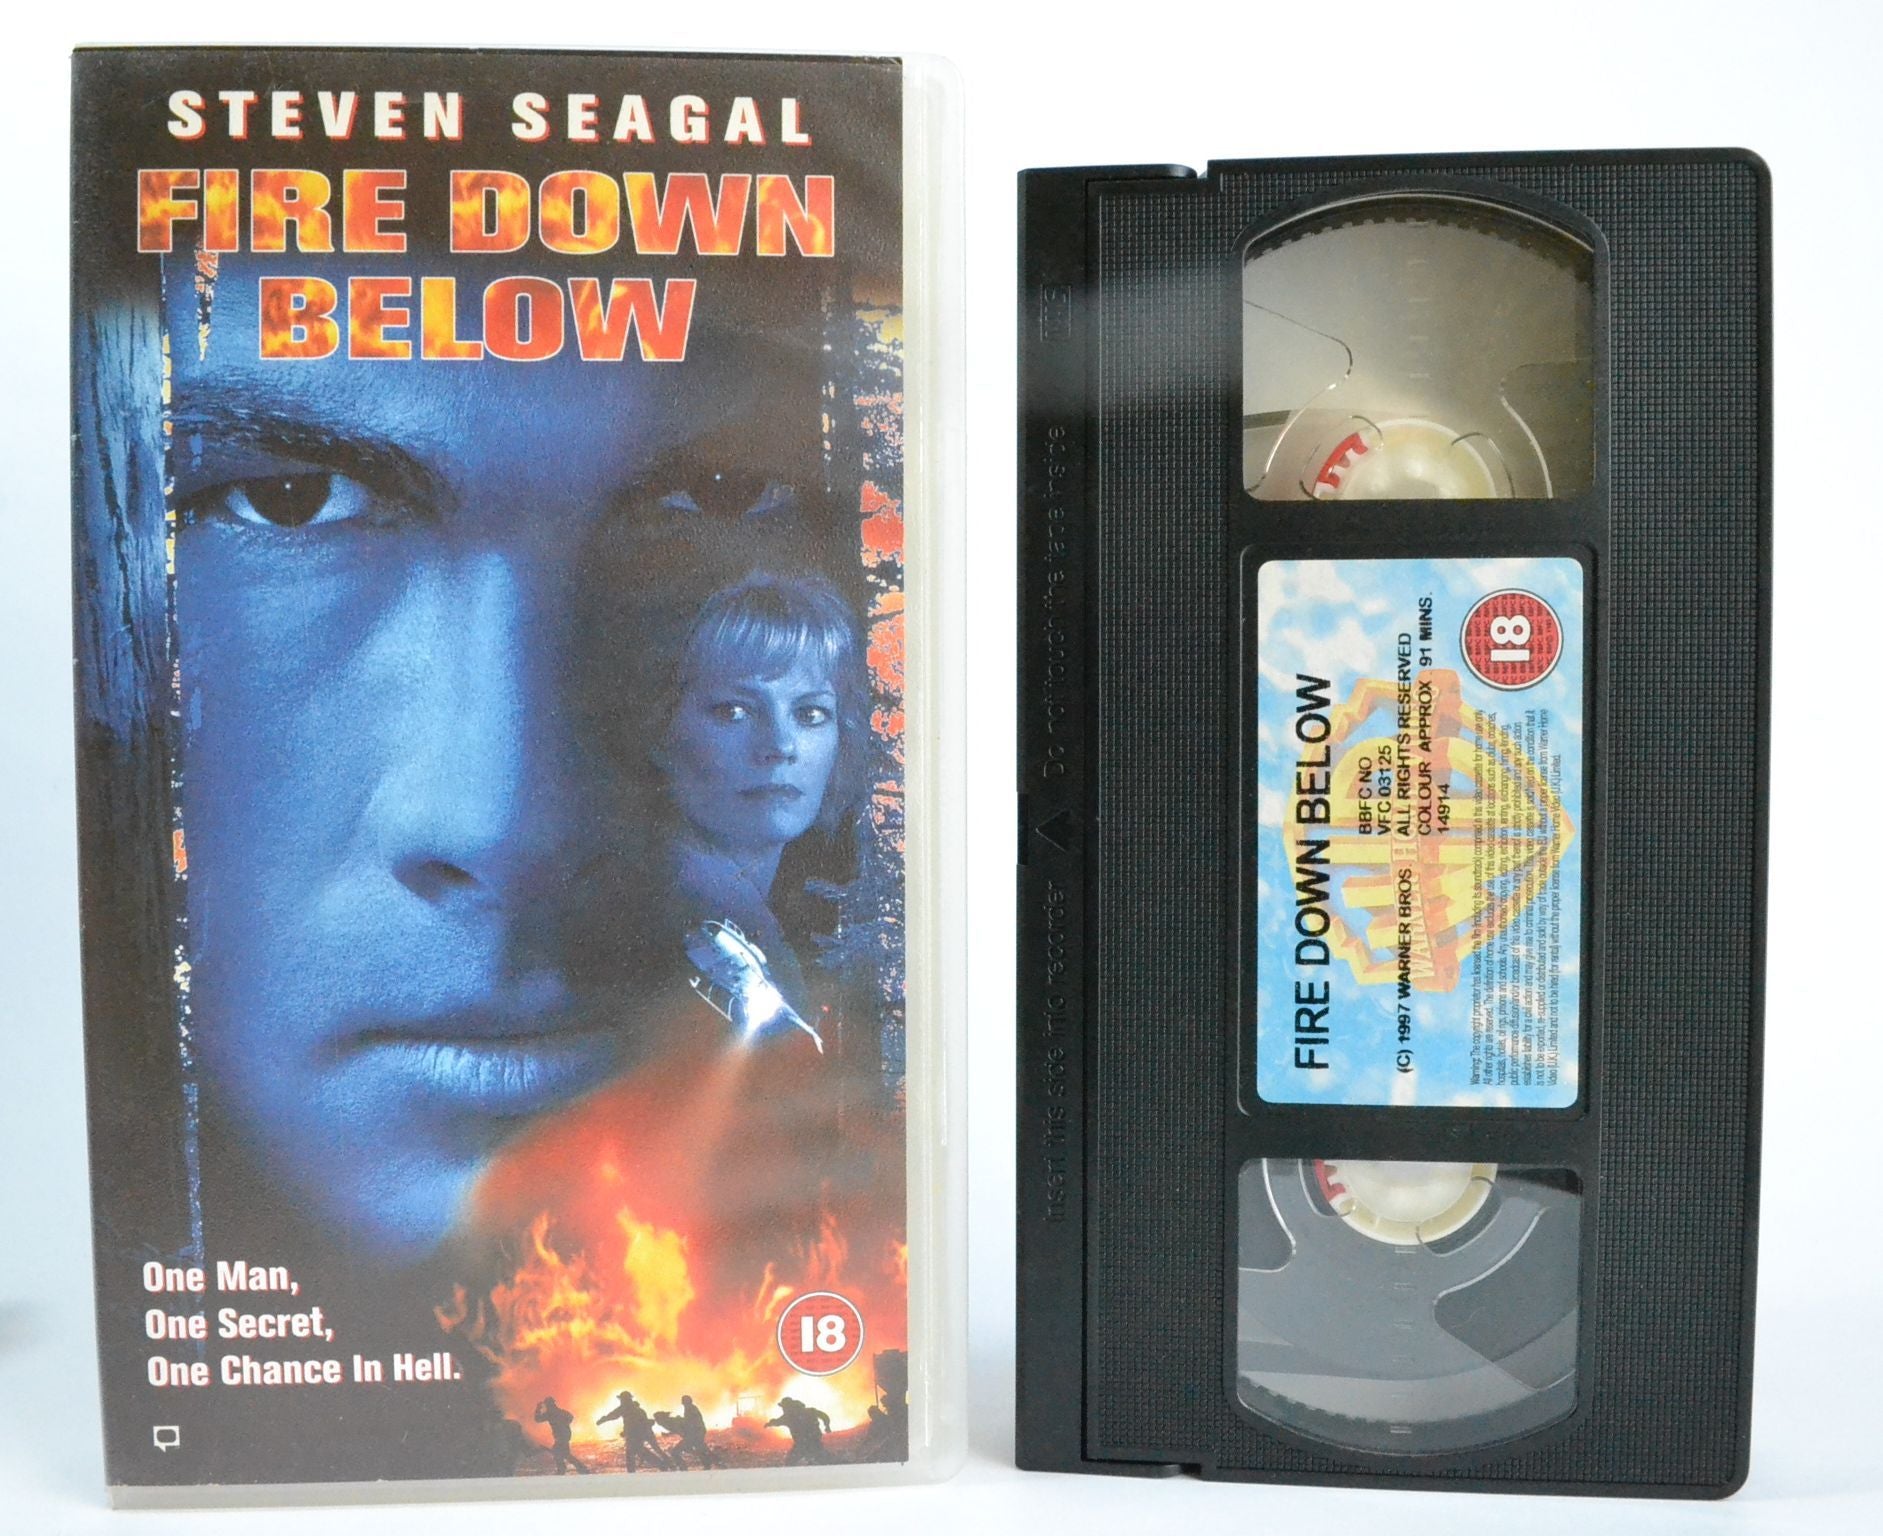 Fire Down Below: Steven Seagal - Toxic Waste - Eco-Thriller - Aikido Action - VHS-